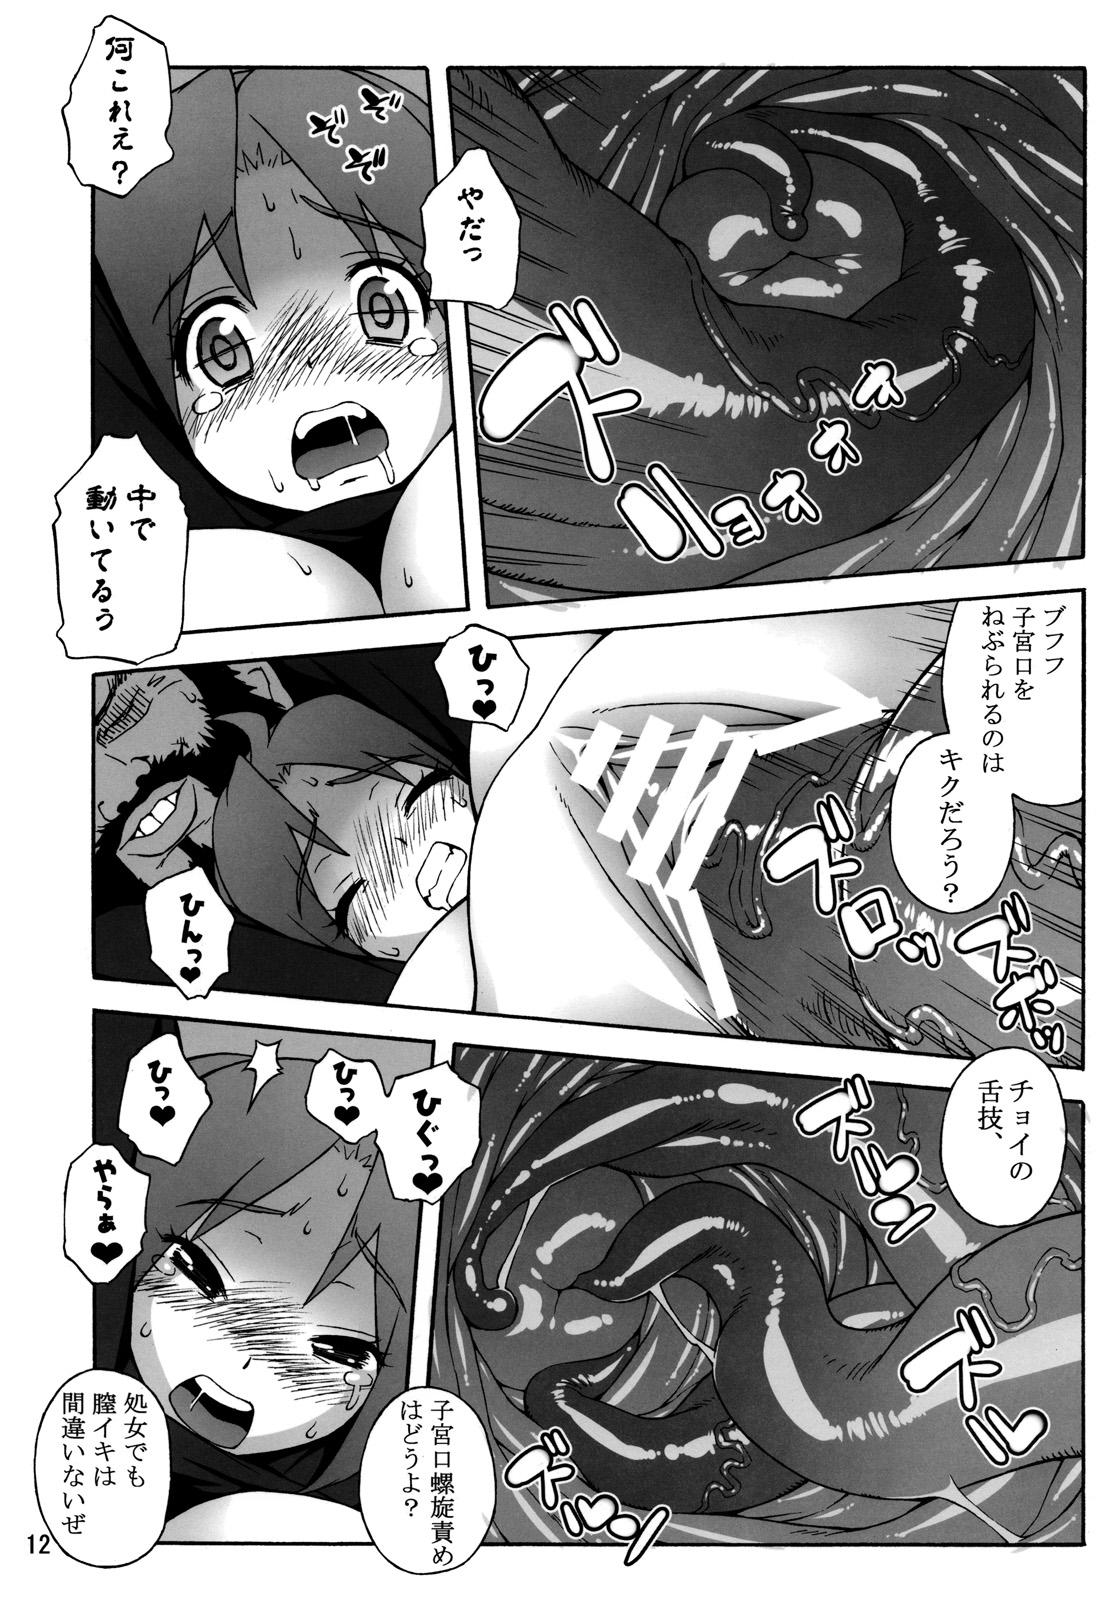 Calcinha A.N.T.R. - King of fighters Free Rough Sex - Page 11